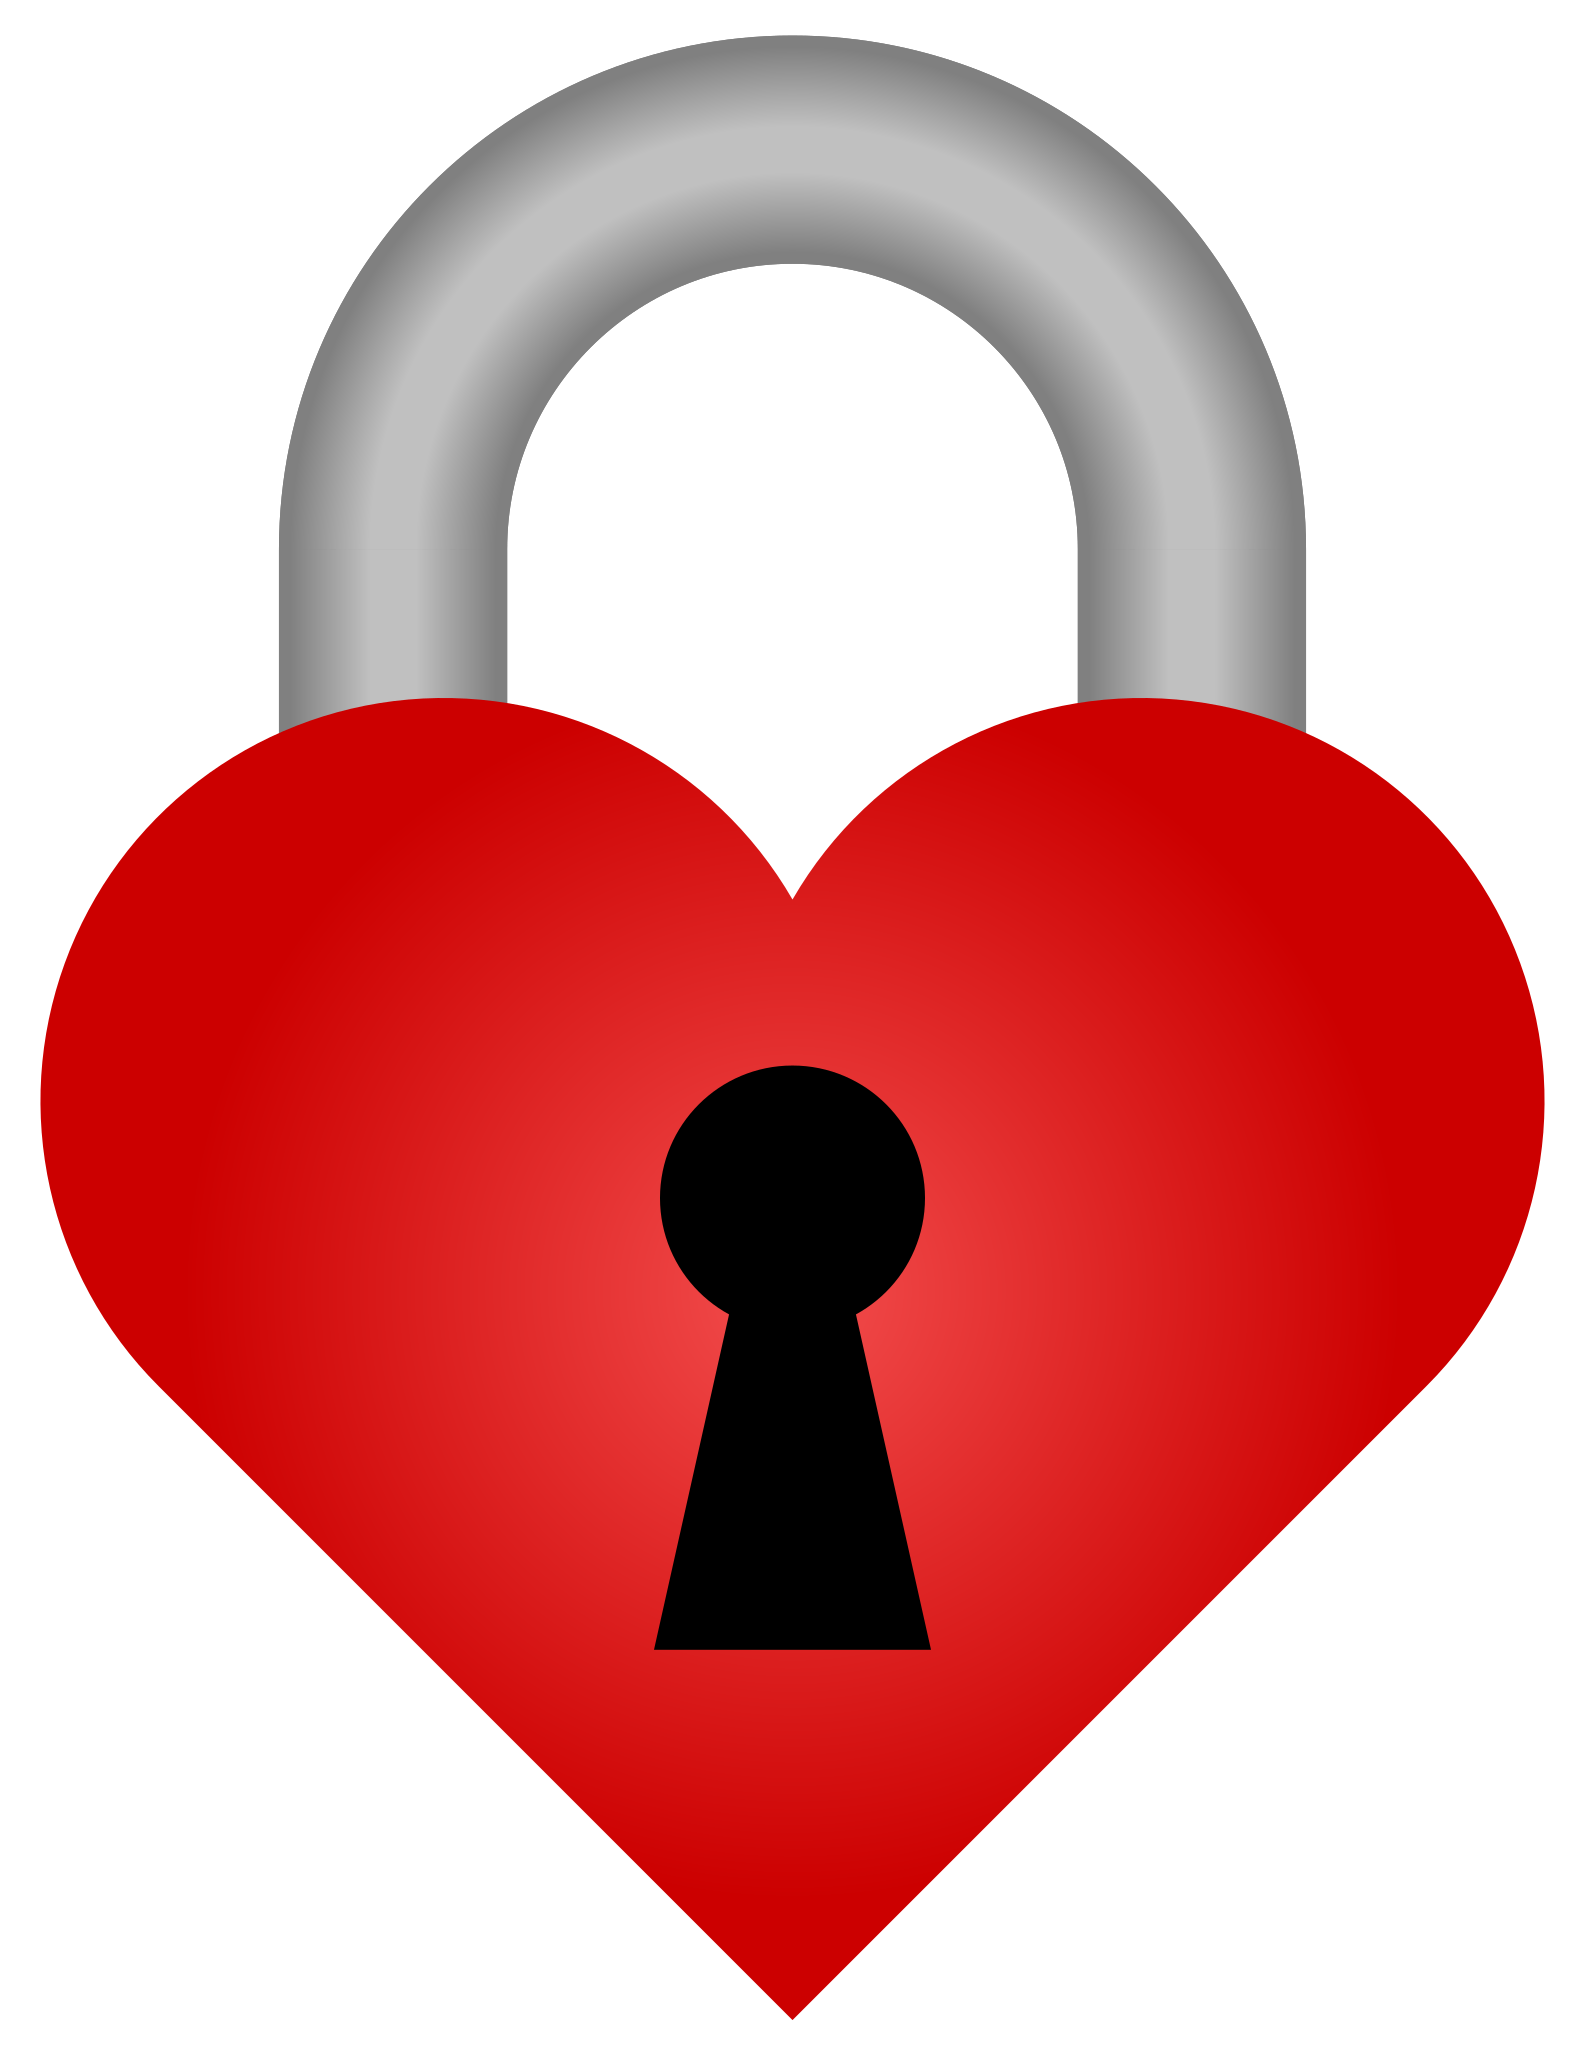 Padlock with a red X symbol